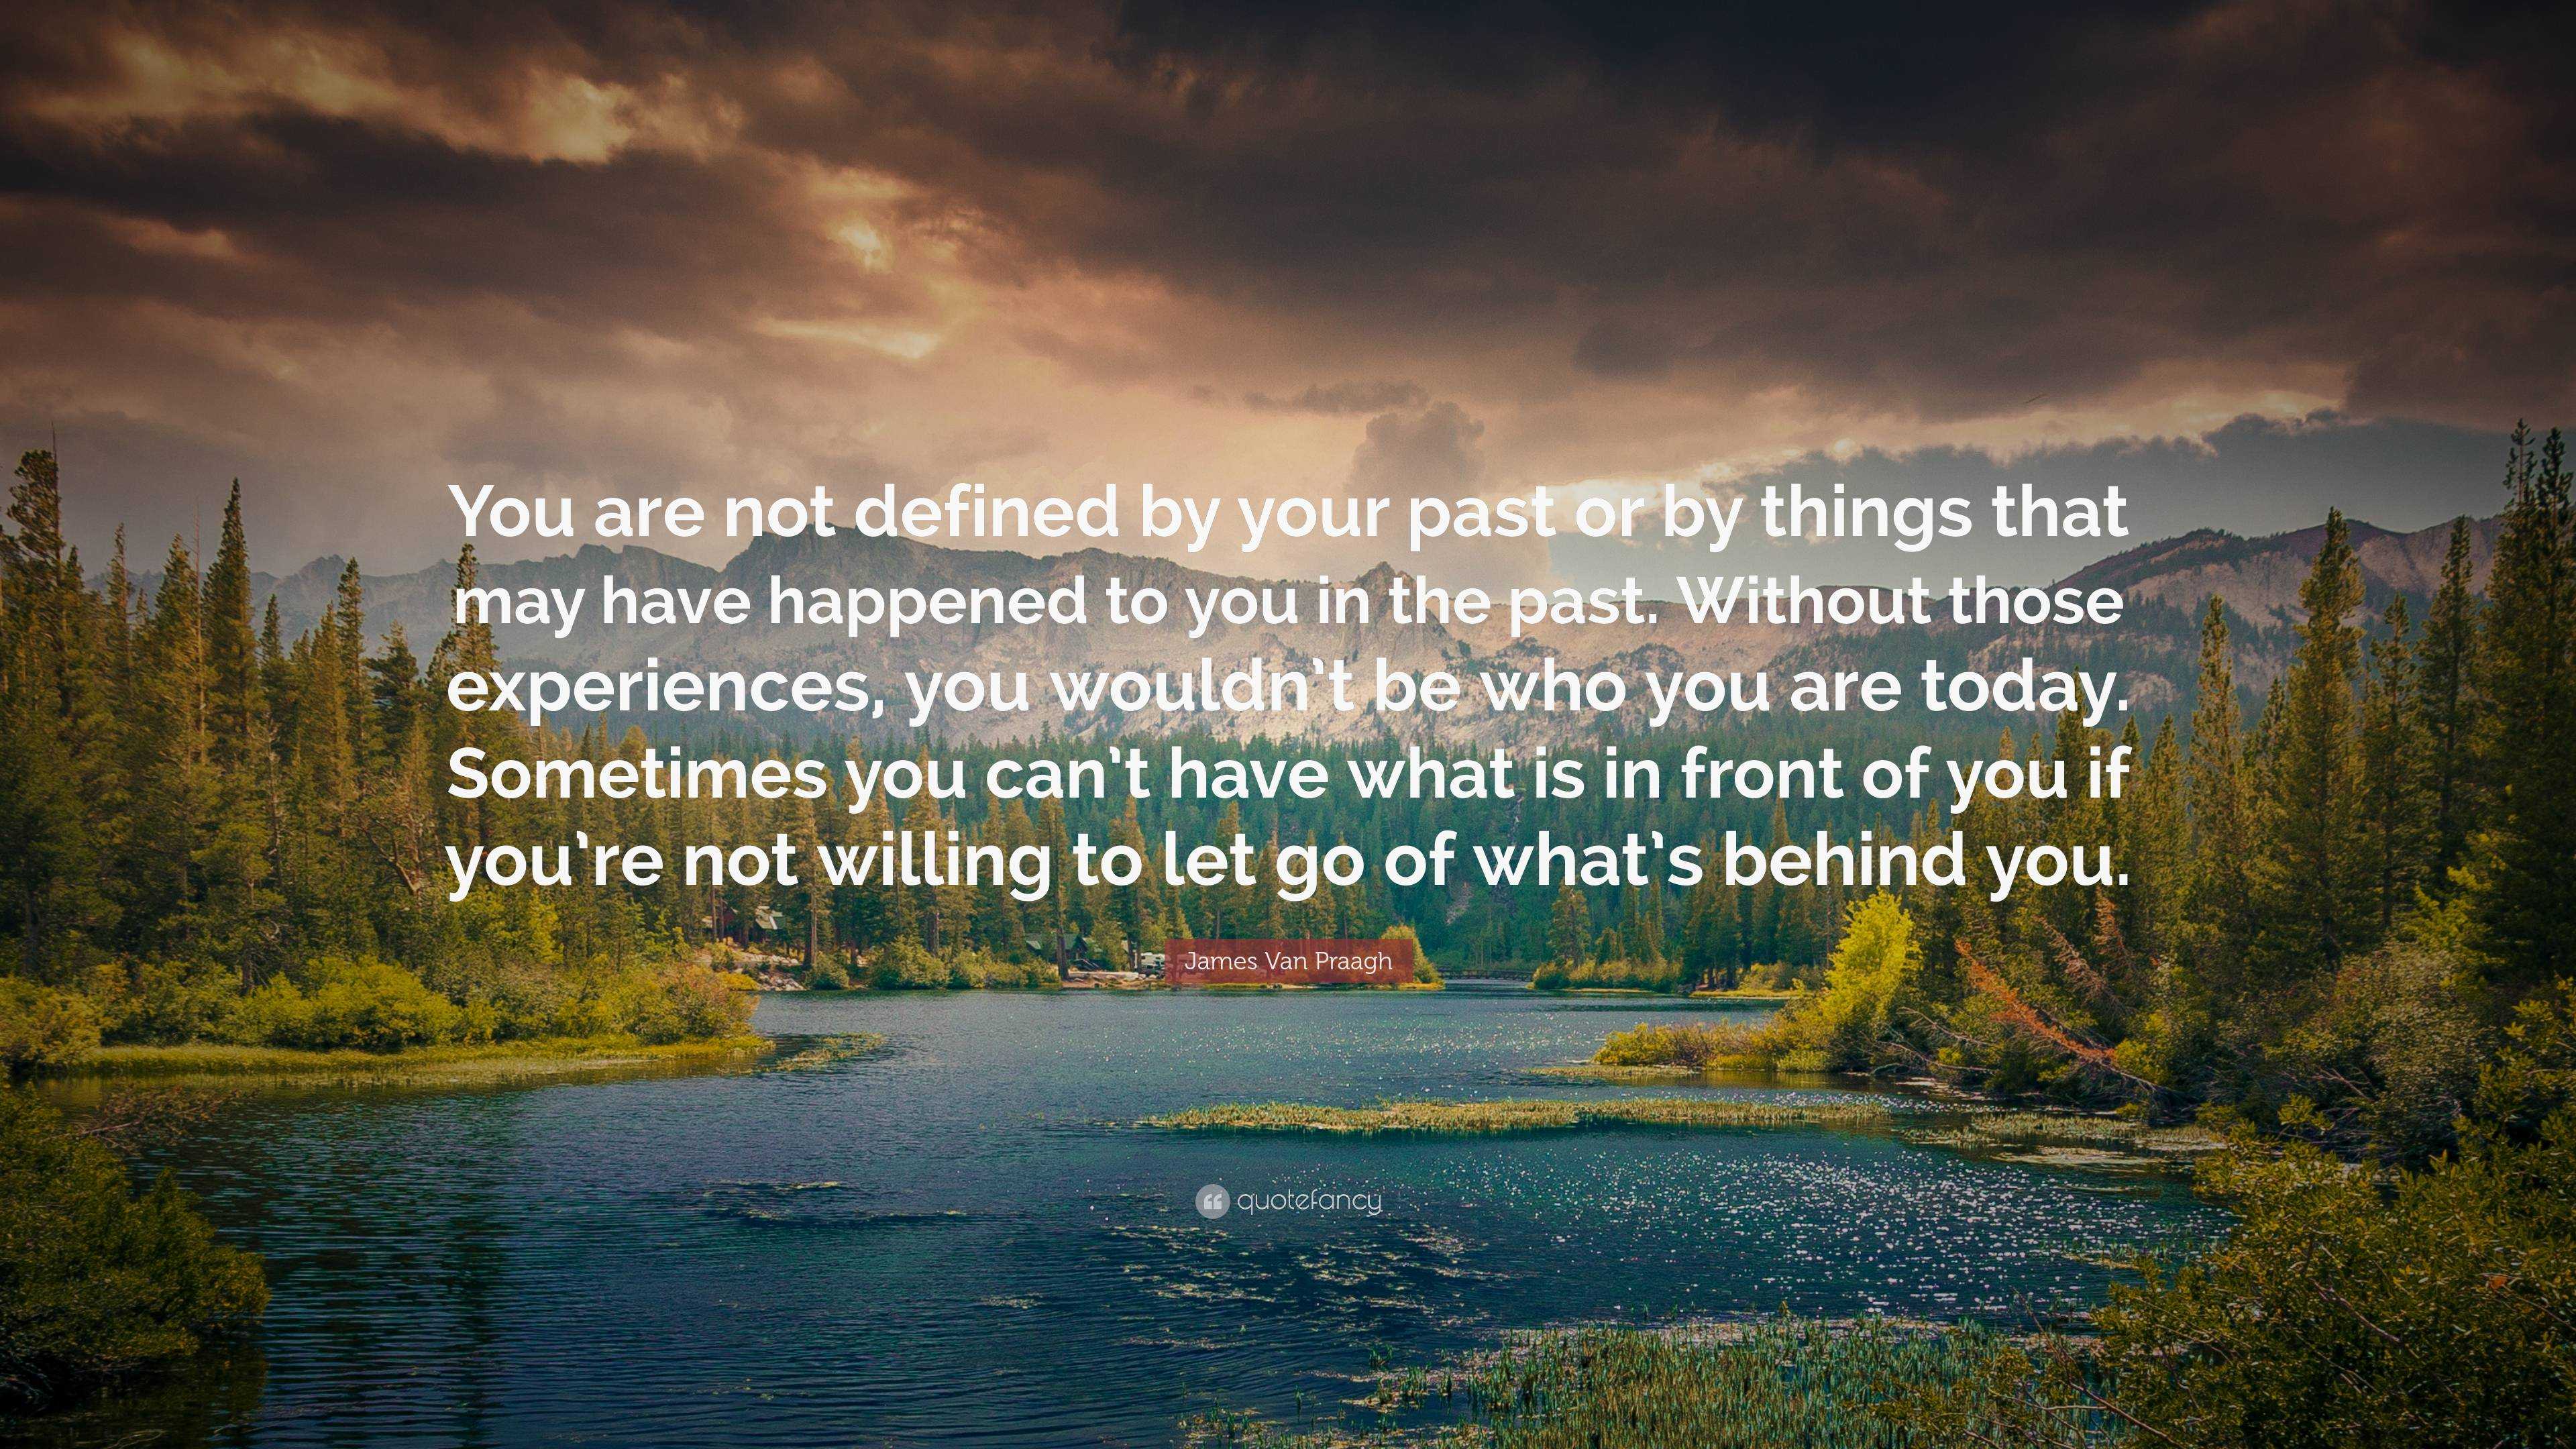 James Van Praagh Quote: “You are not defined by your past or by things ...